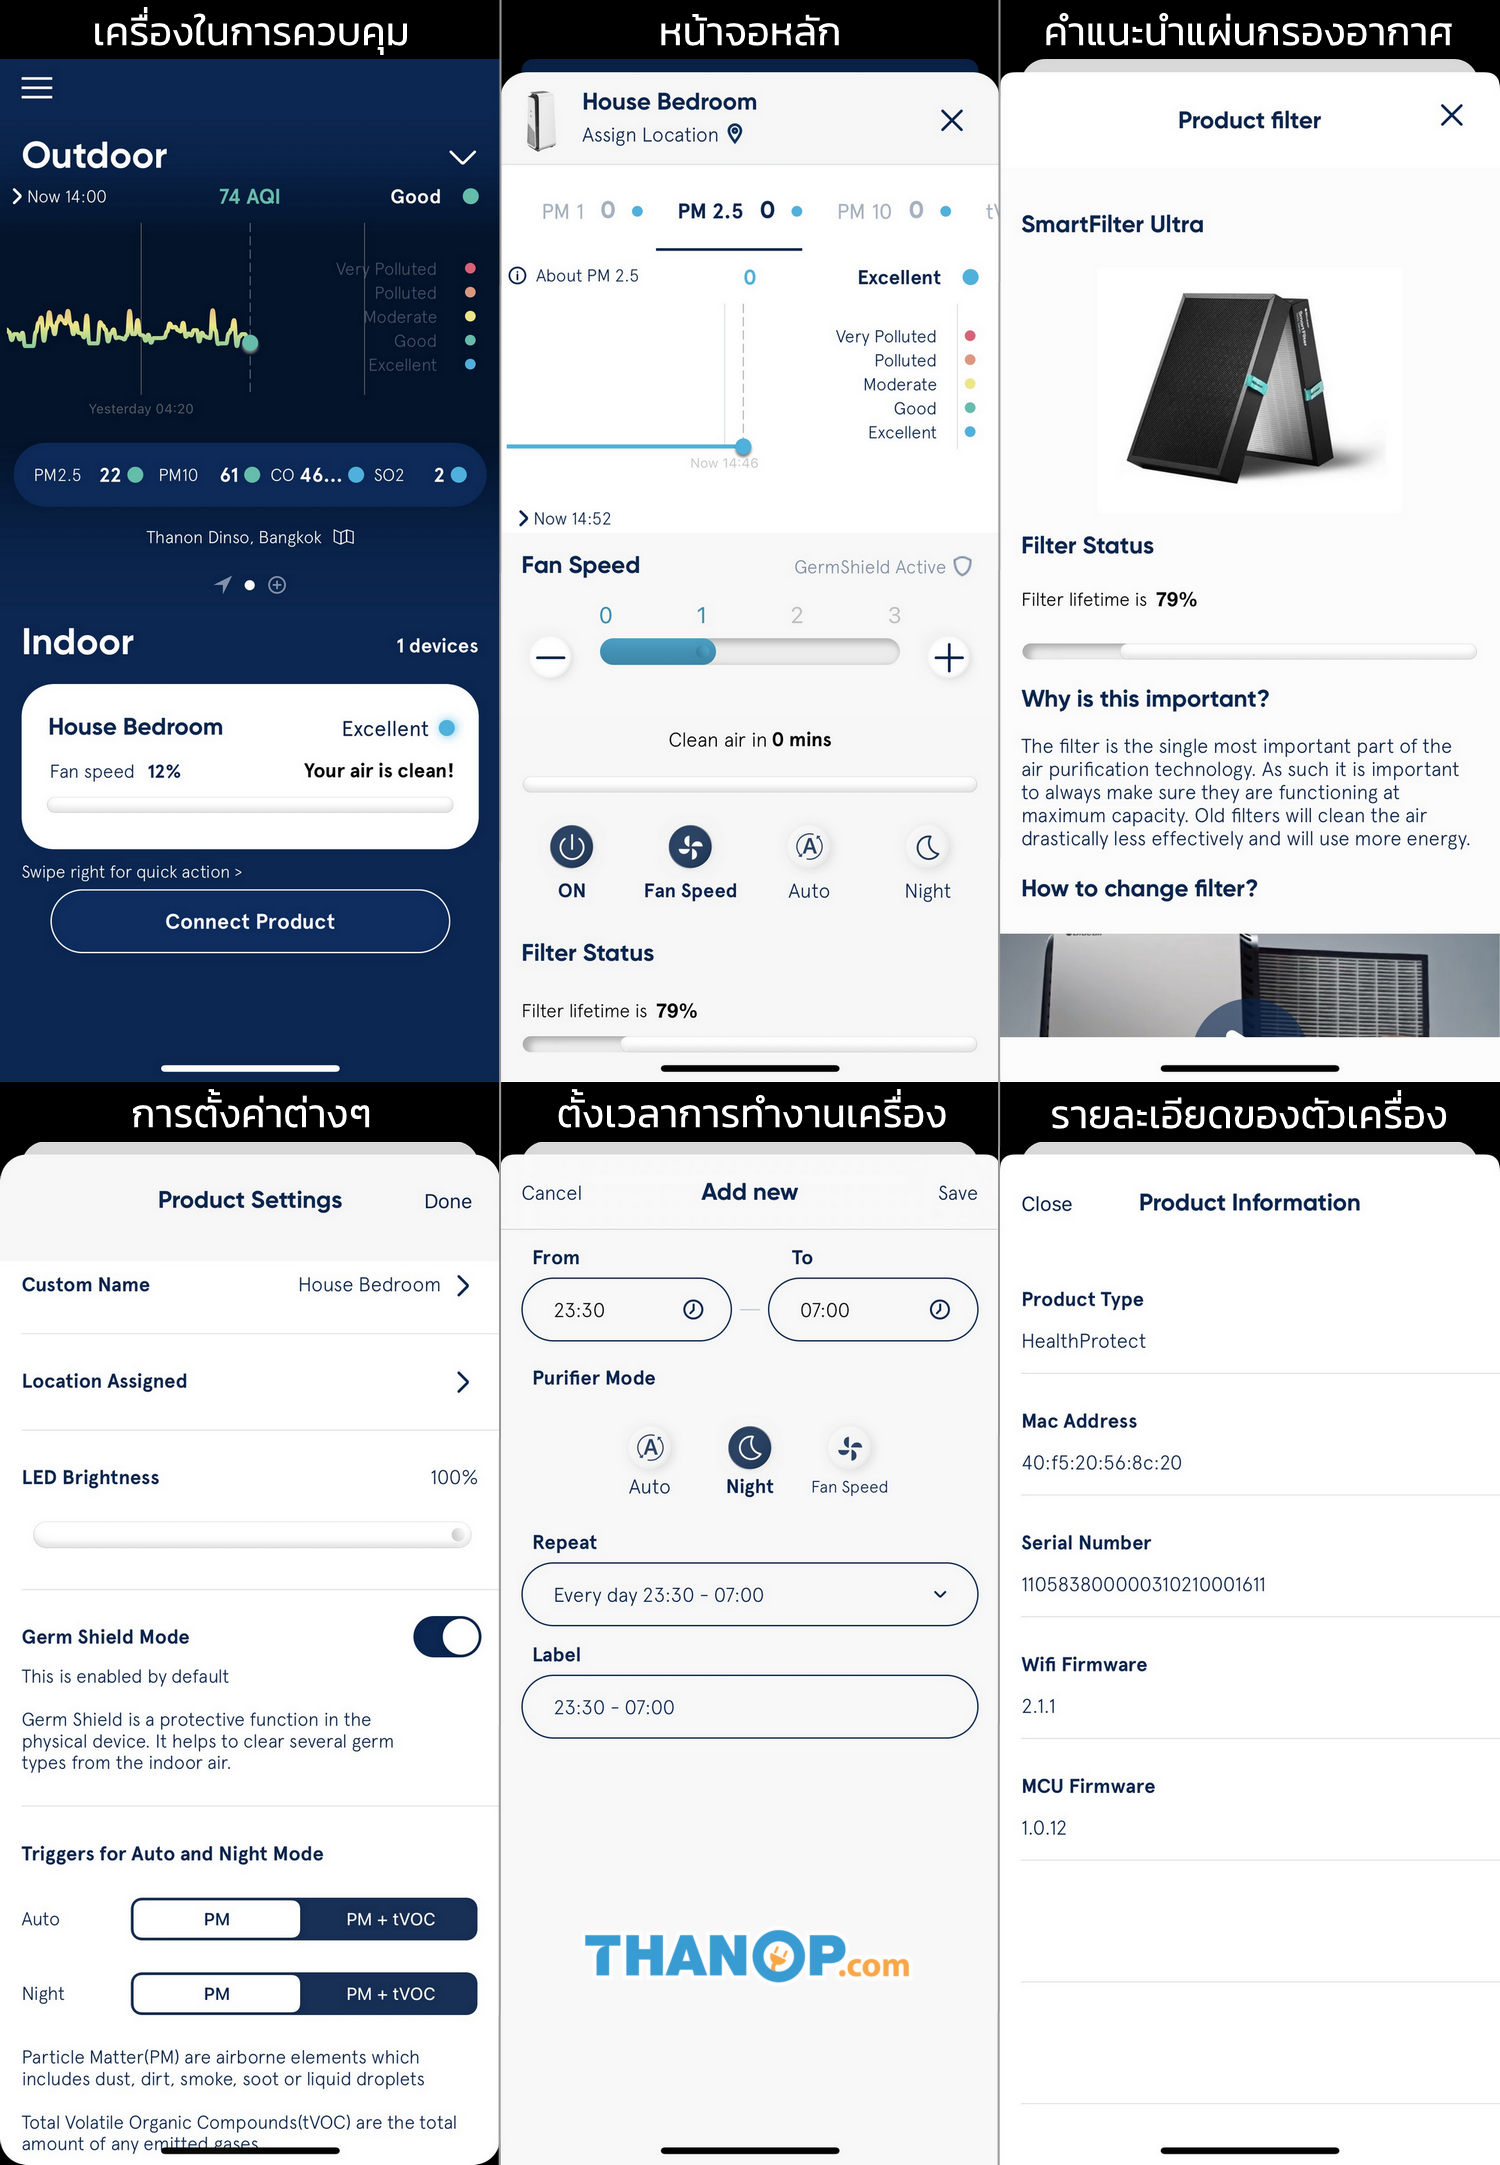 blueair-app-interface-general-example-for-healthprotect-family